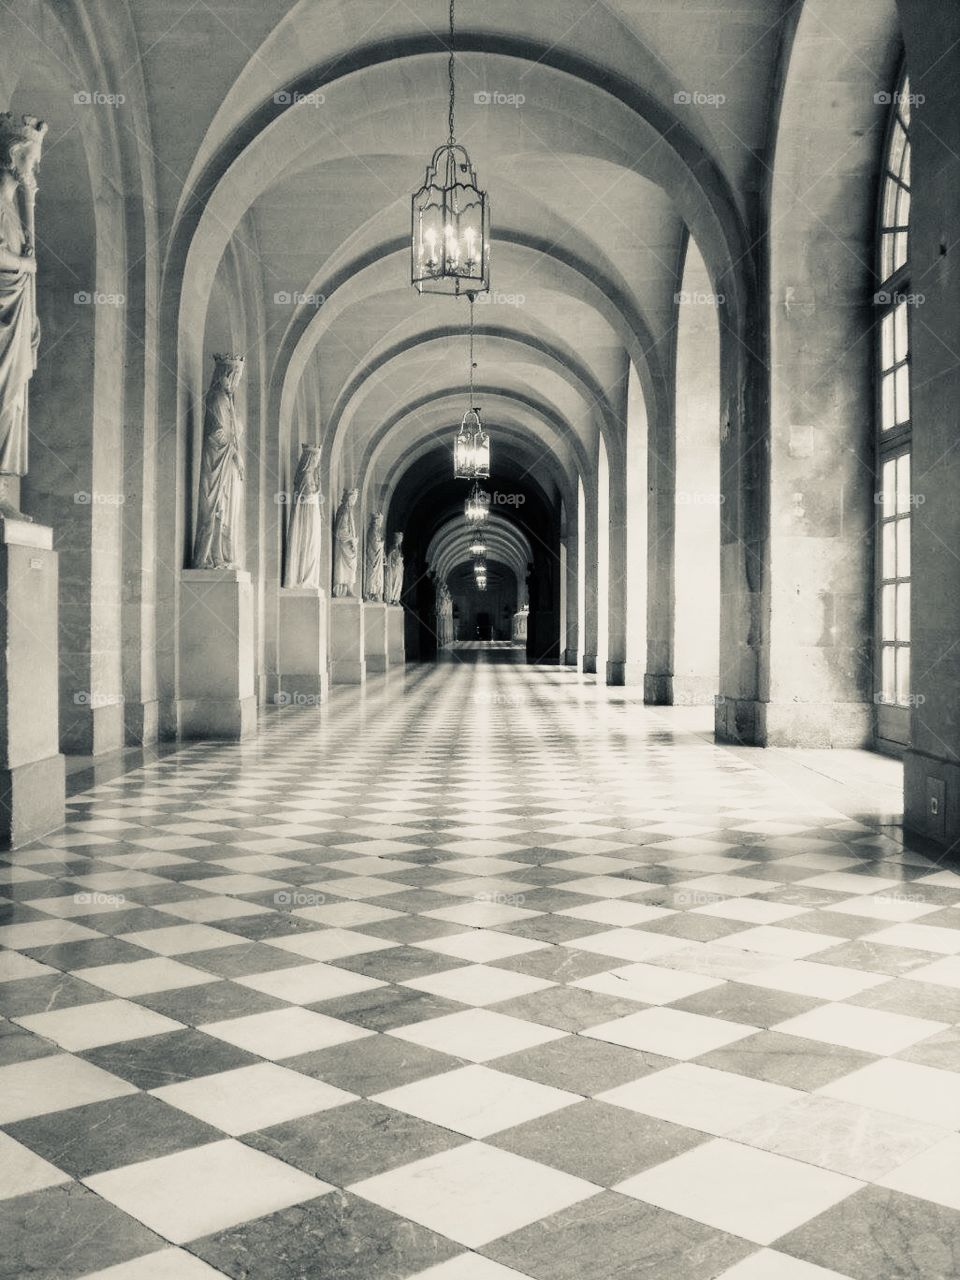 Hall of the palace